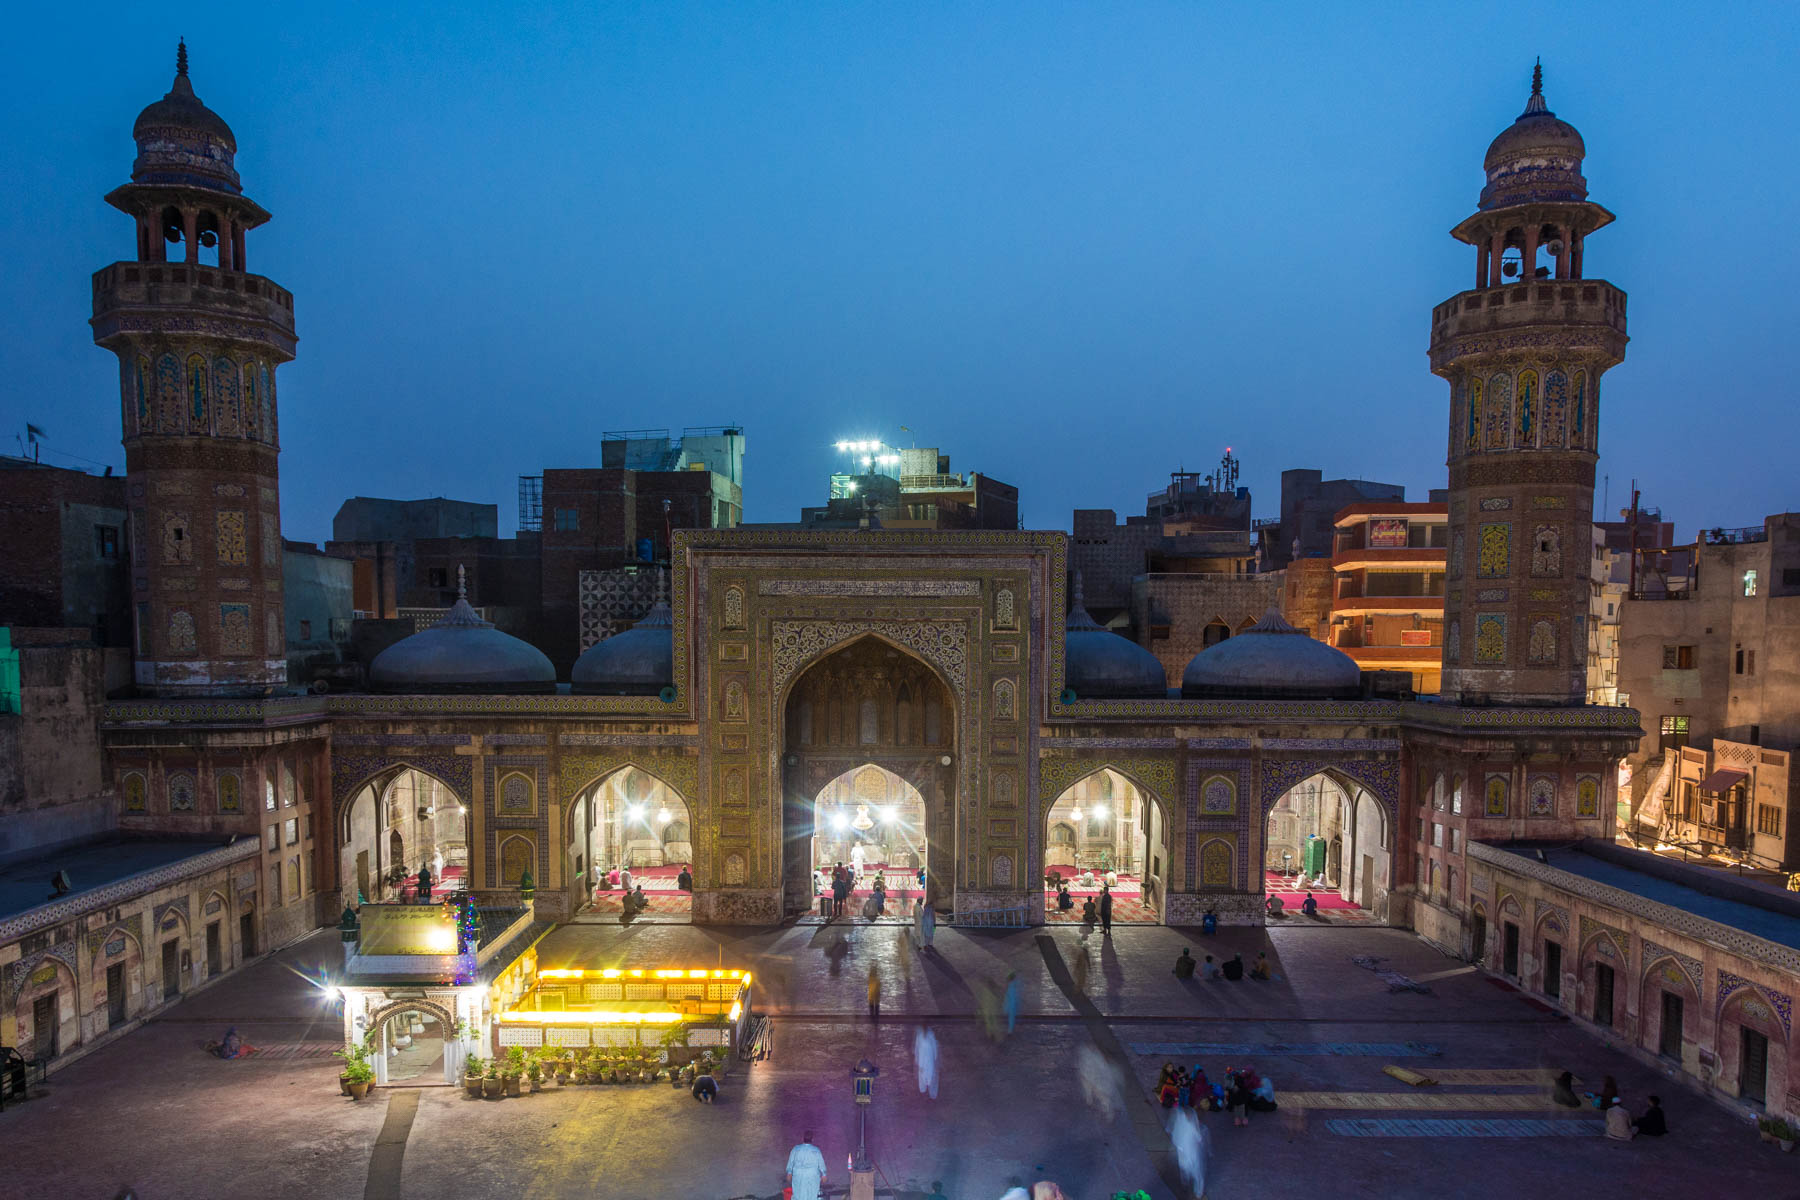 Travel in Pakistan during Ramadan - The Wazir Khan mosque in Lahore from above after iftar - Lost With Purpose